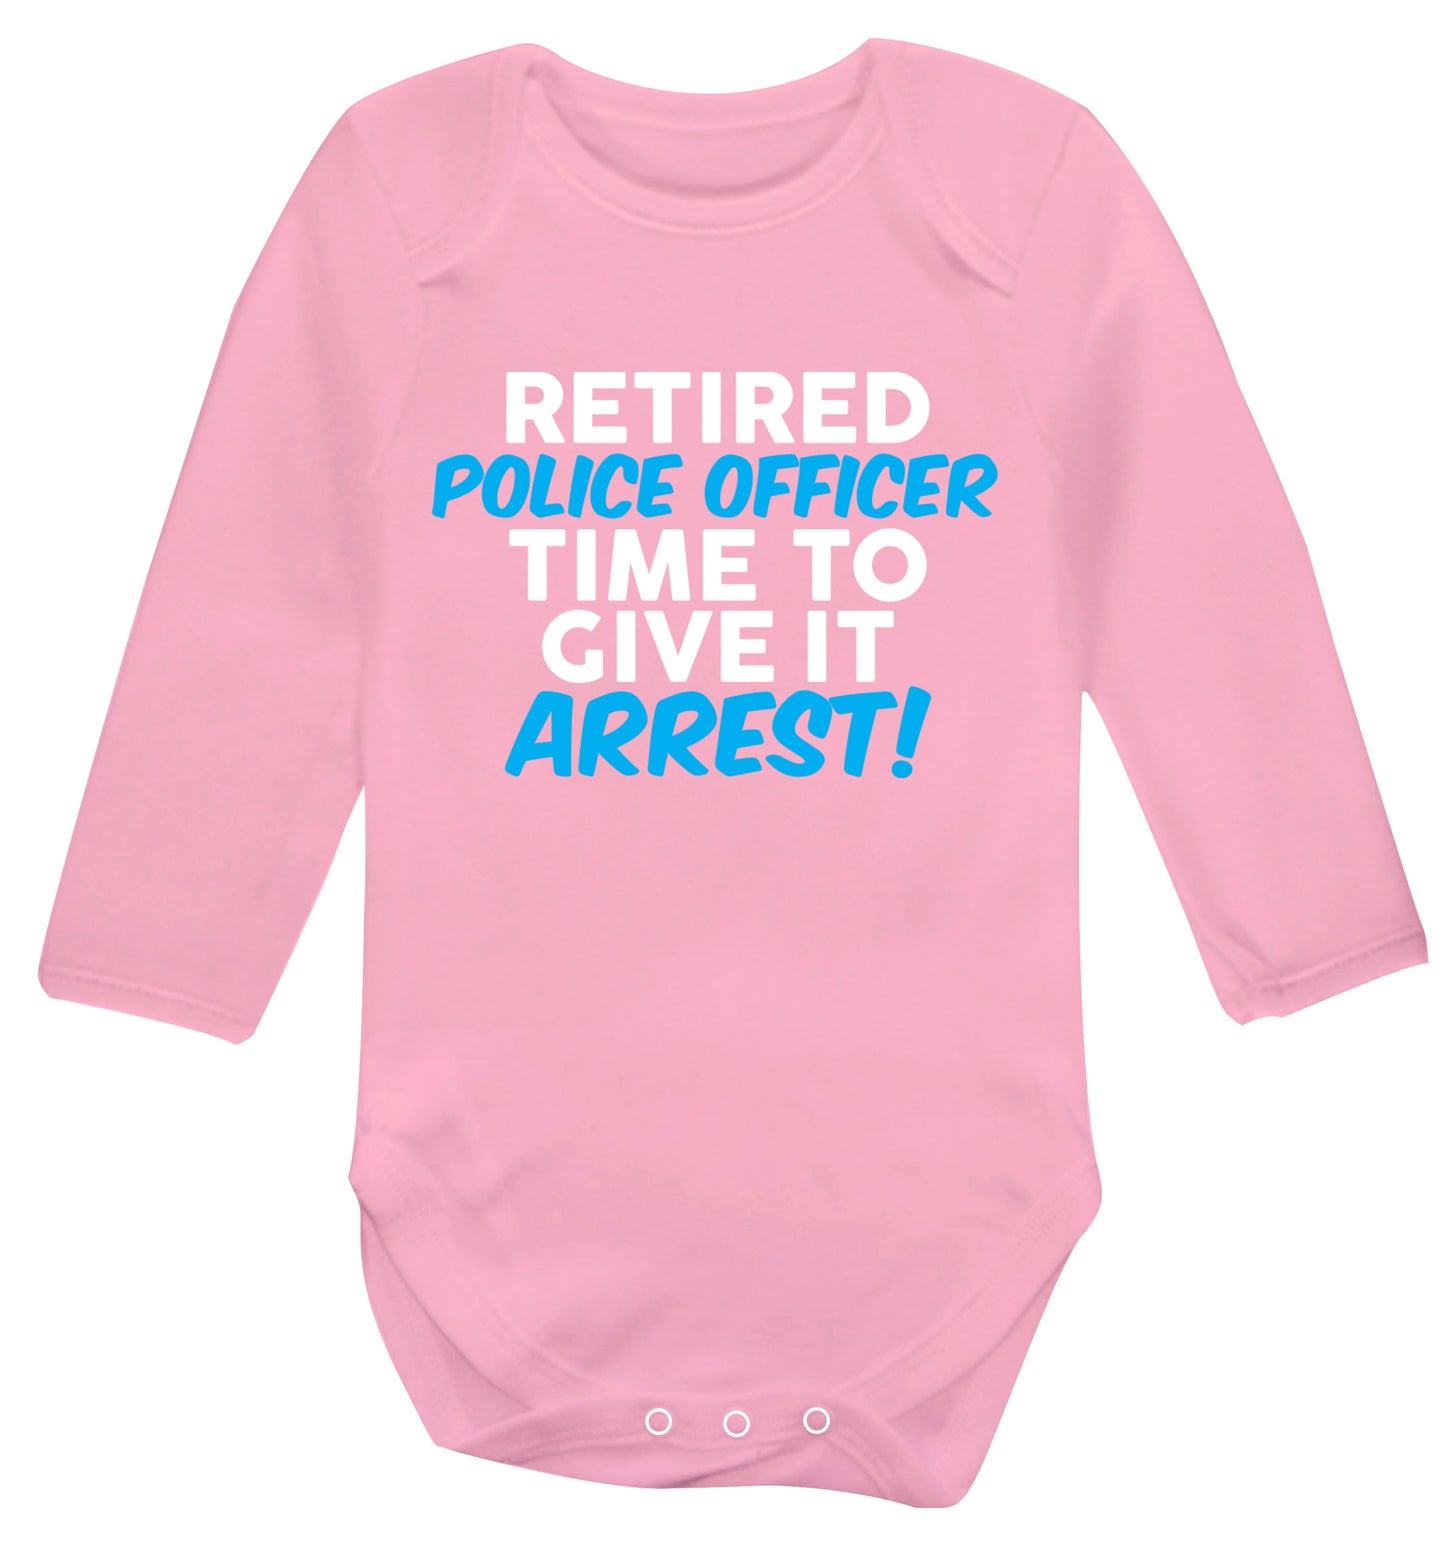 Retired police officer time to give it arrest Baby Vest long sleeved pale pink 6-12 months